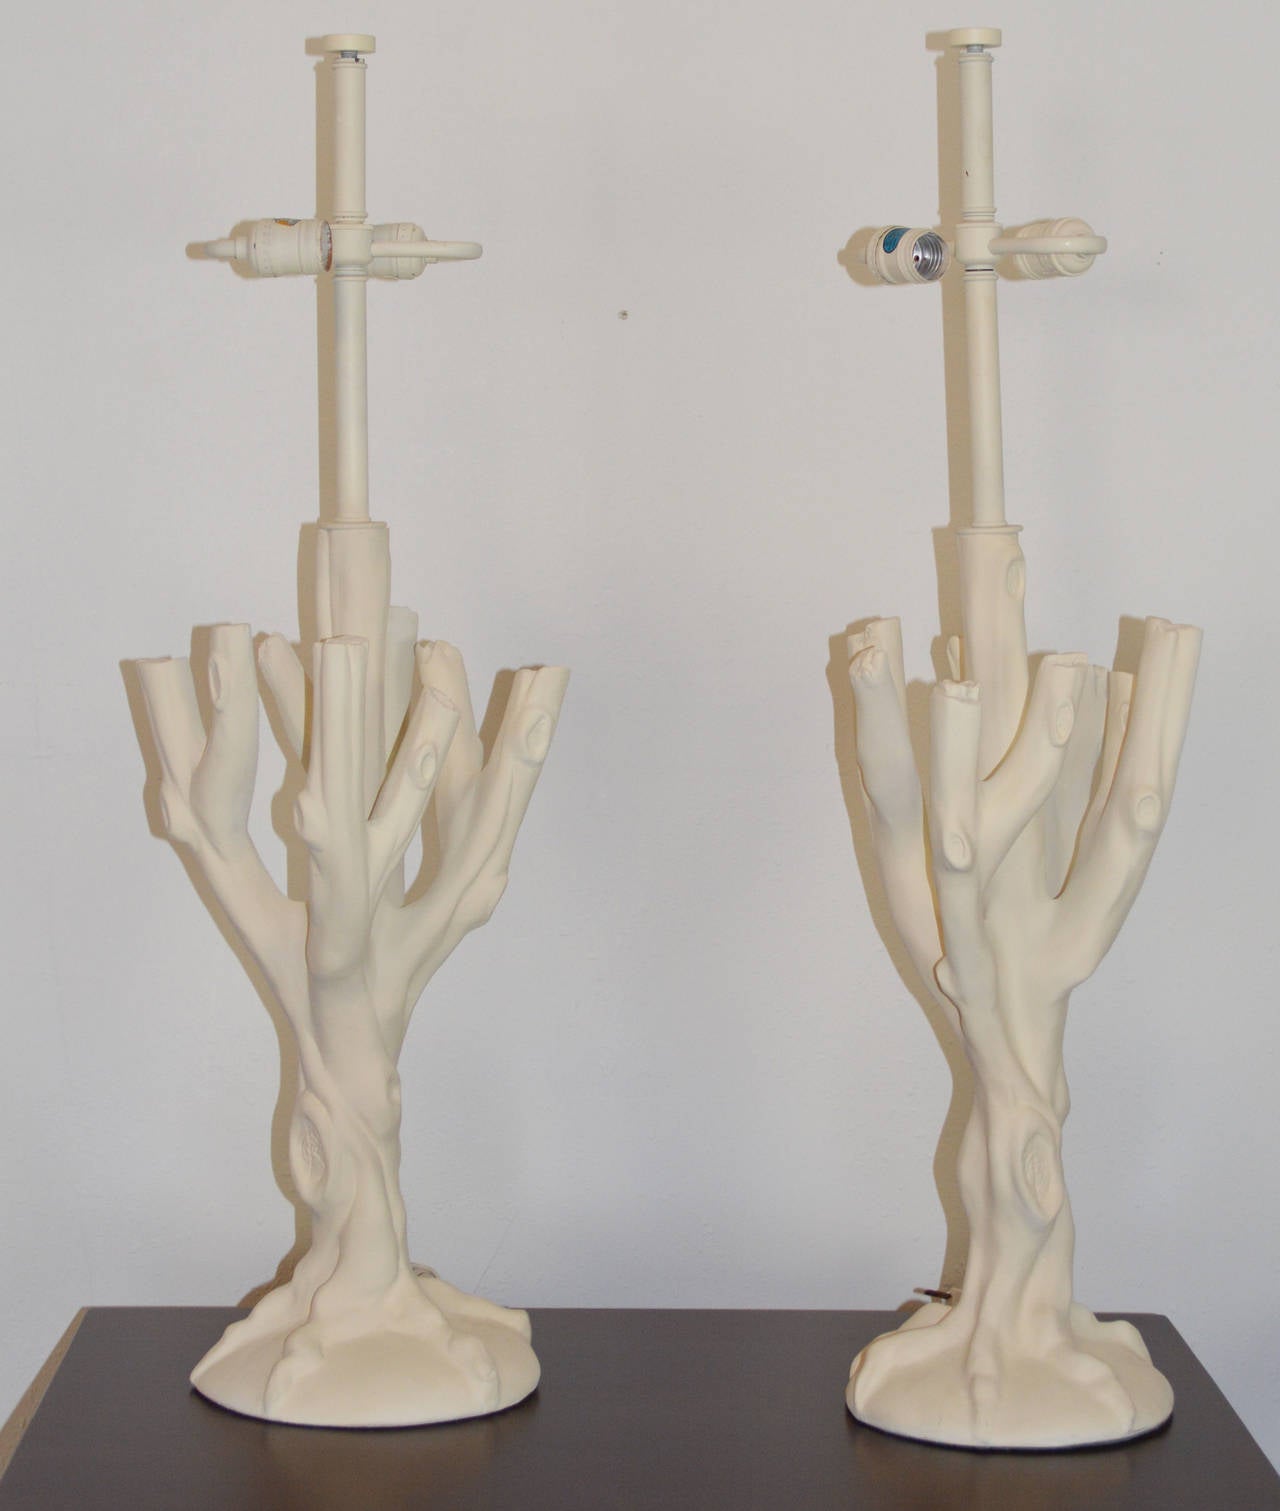 20th Century Pair of Plaster Tree Lamps in the Style of John Dickinson